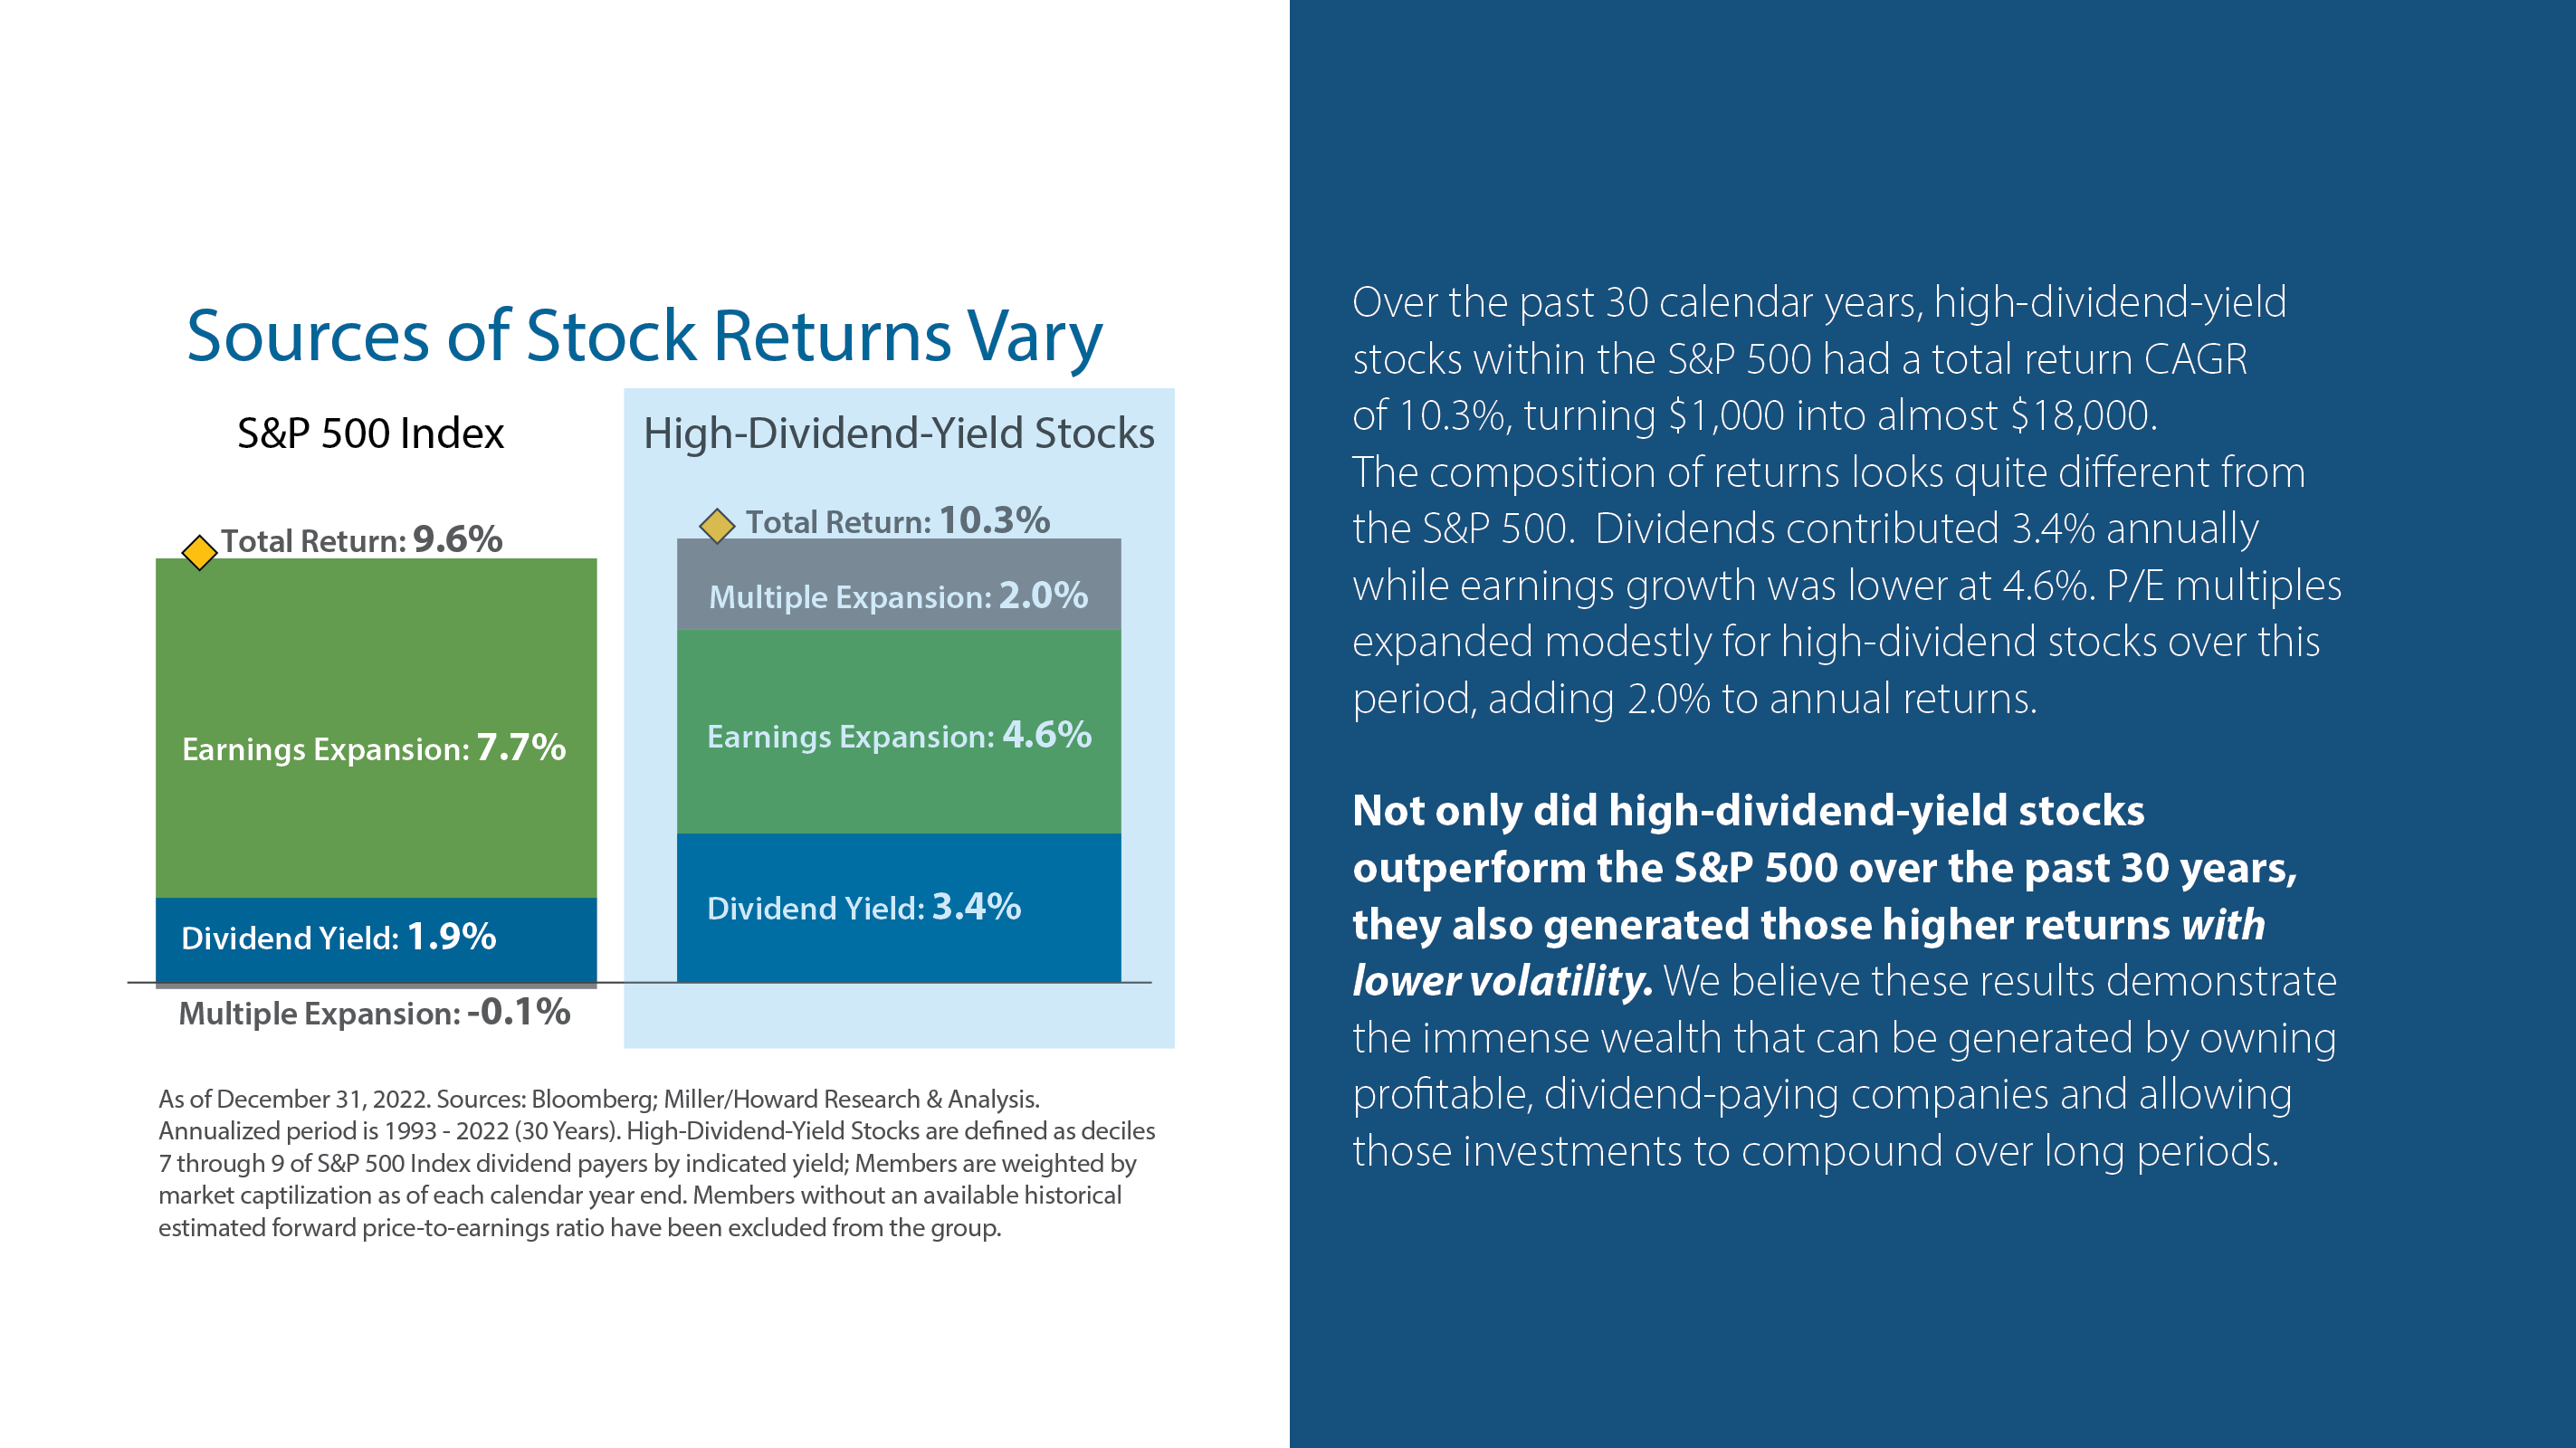 Sources of Stock Returns Vary